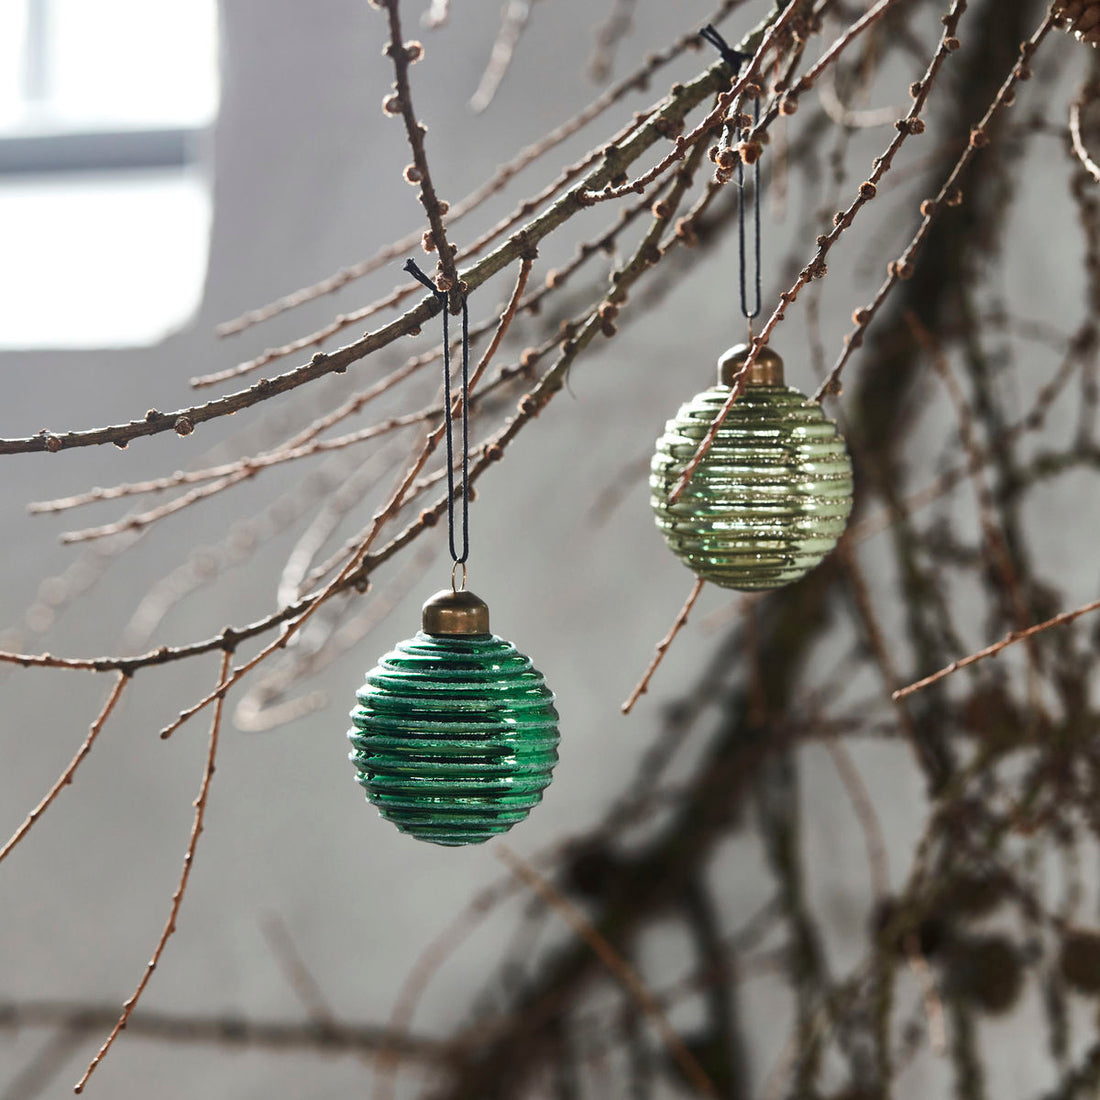 House Doctor-Christmas decorations, lolli, green-dia: 6 cm